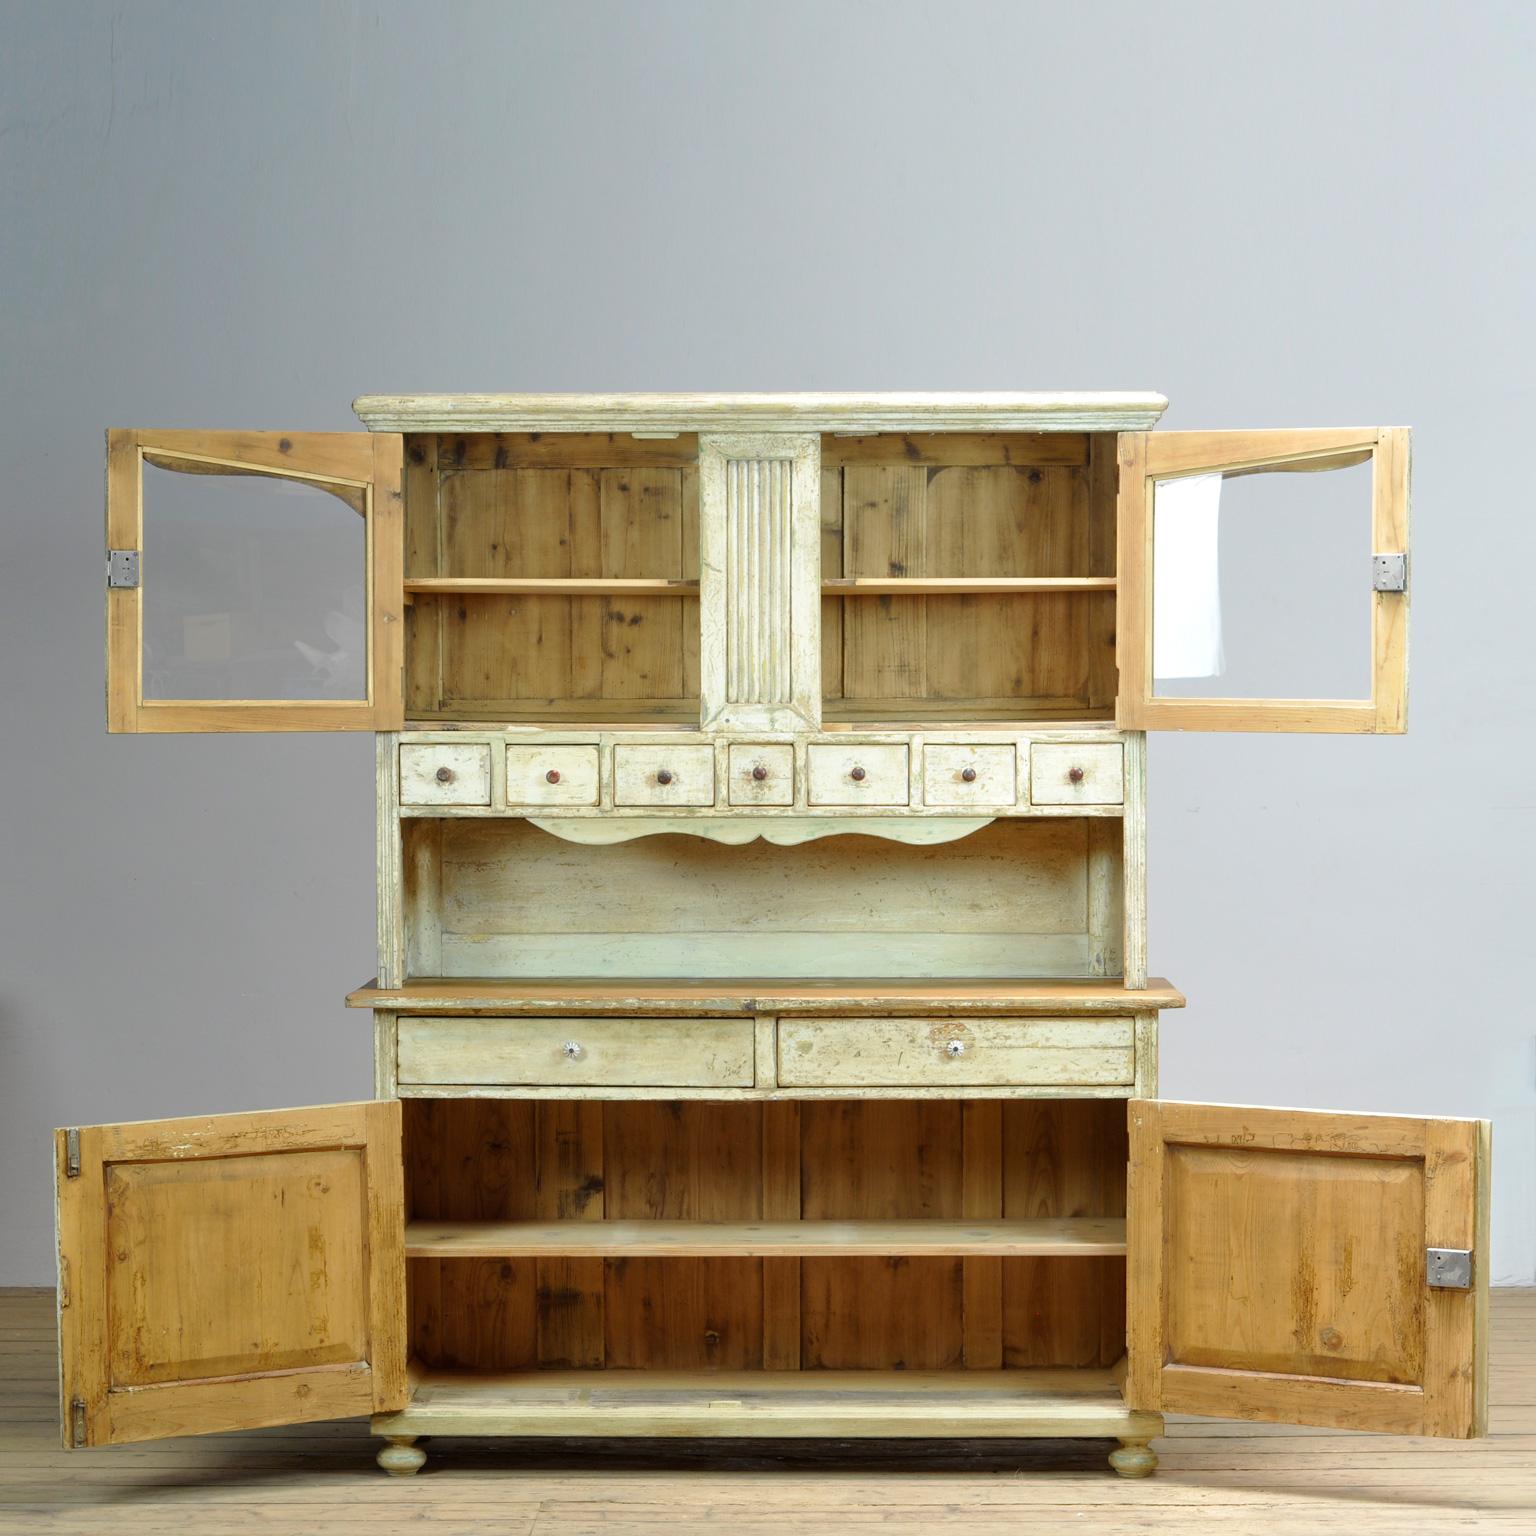 Rustic Solid Pine Kitchen Cupboard, 1920's